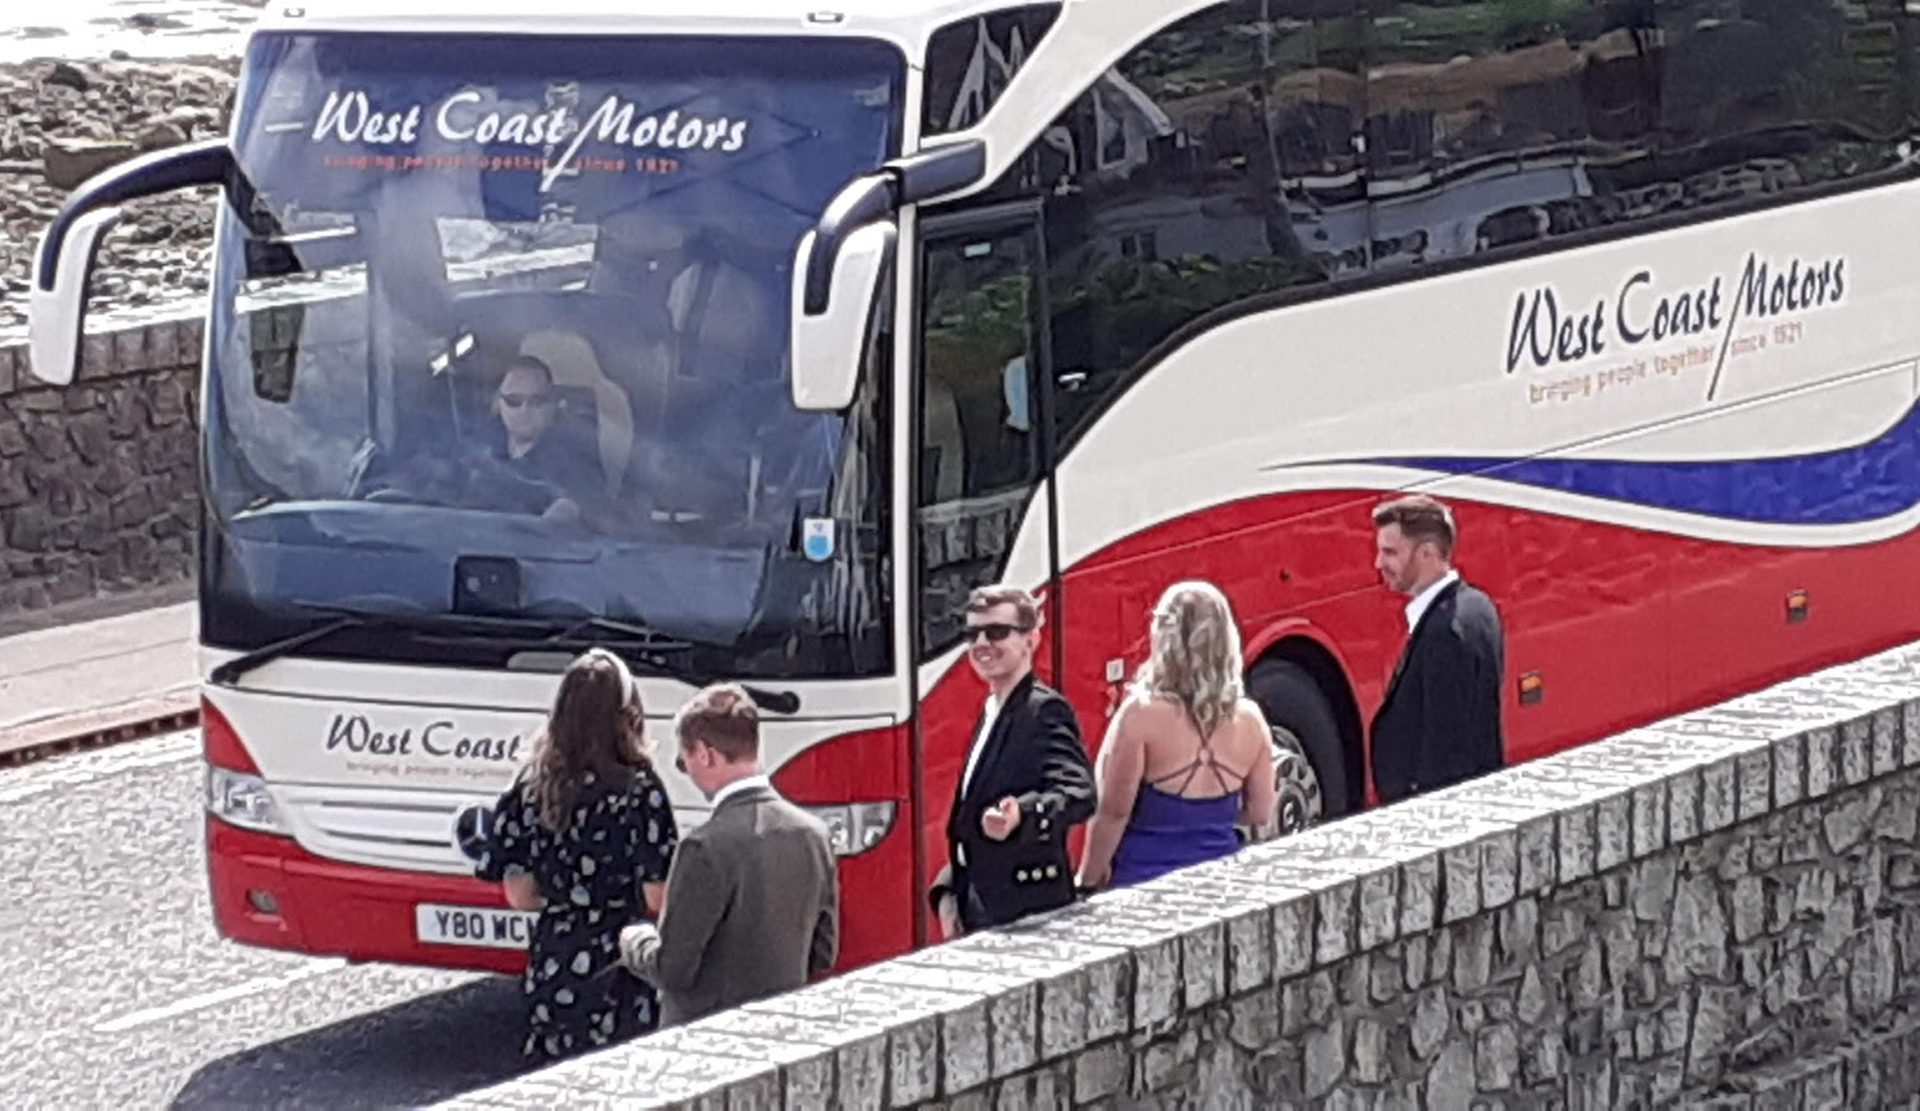 Wedding guests are about to board the coach that takes them to the wedding. They look happy and ready for the day